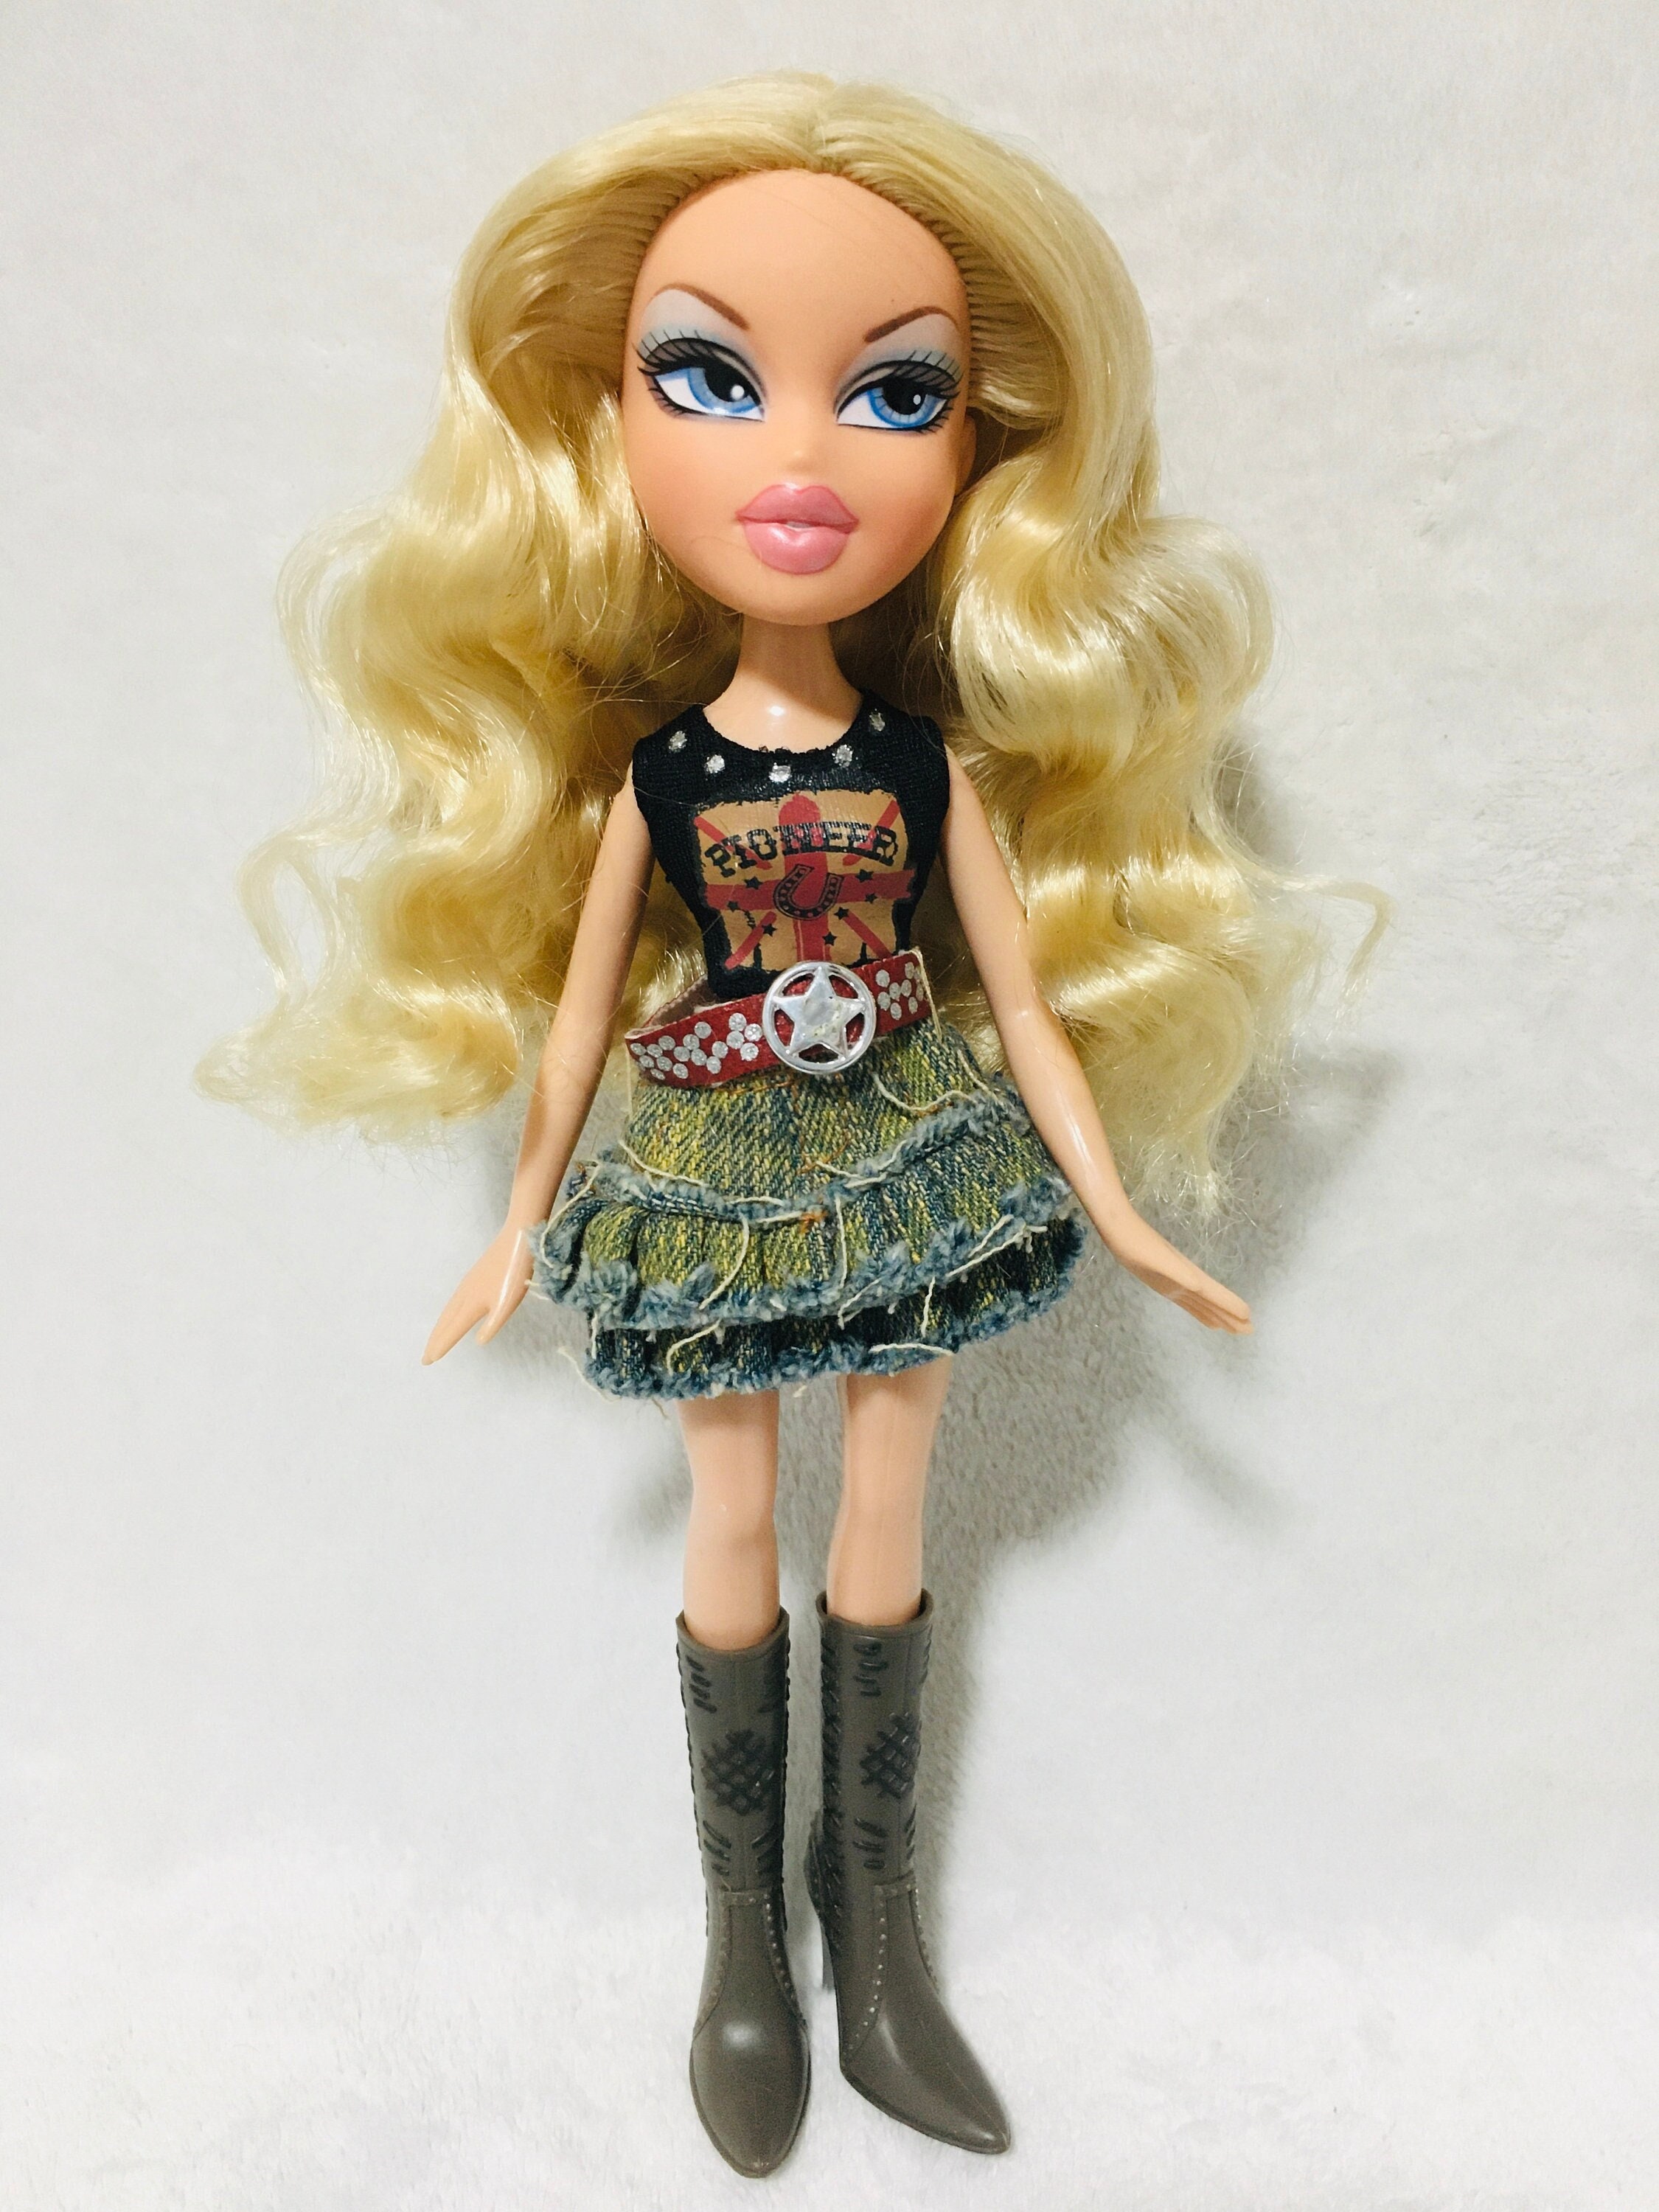 For 24 Big Bratz Dolls, Outfit Only, Rainbow Mermaid Mini Dress W/ Ruffle  Trim, Sleeves, Hairclip, Handmade Doll Clothes by Dolltraveller -   Canada